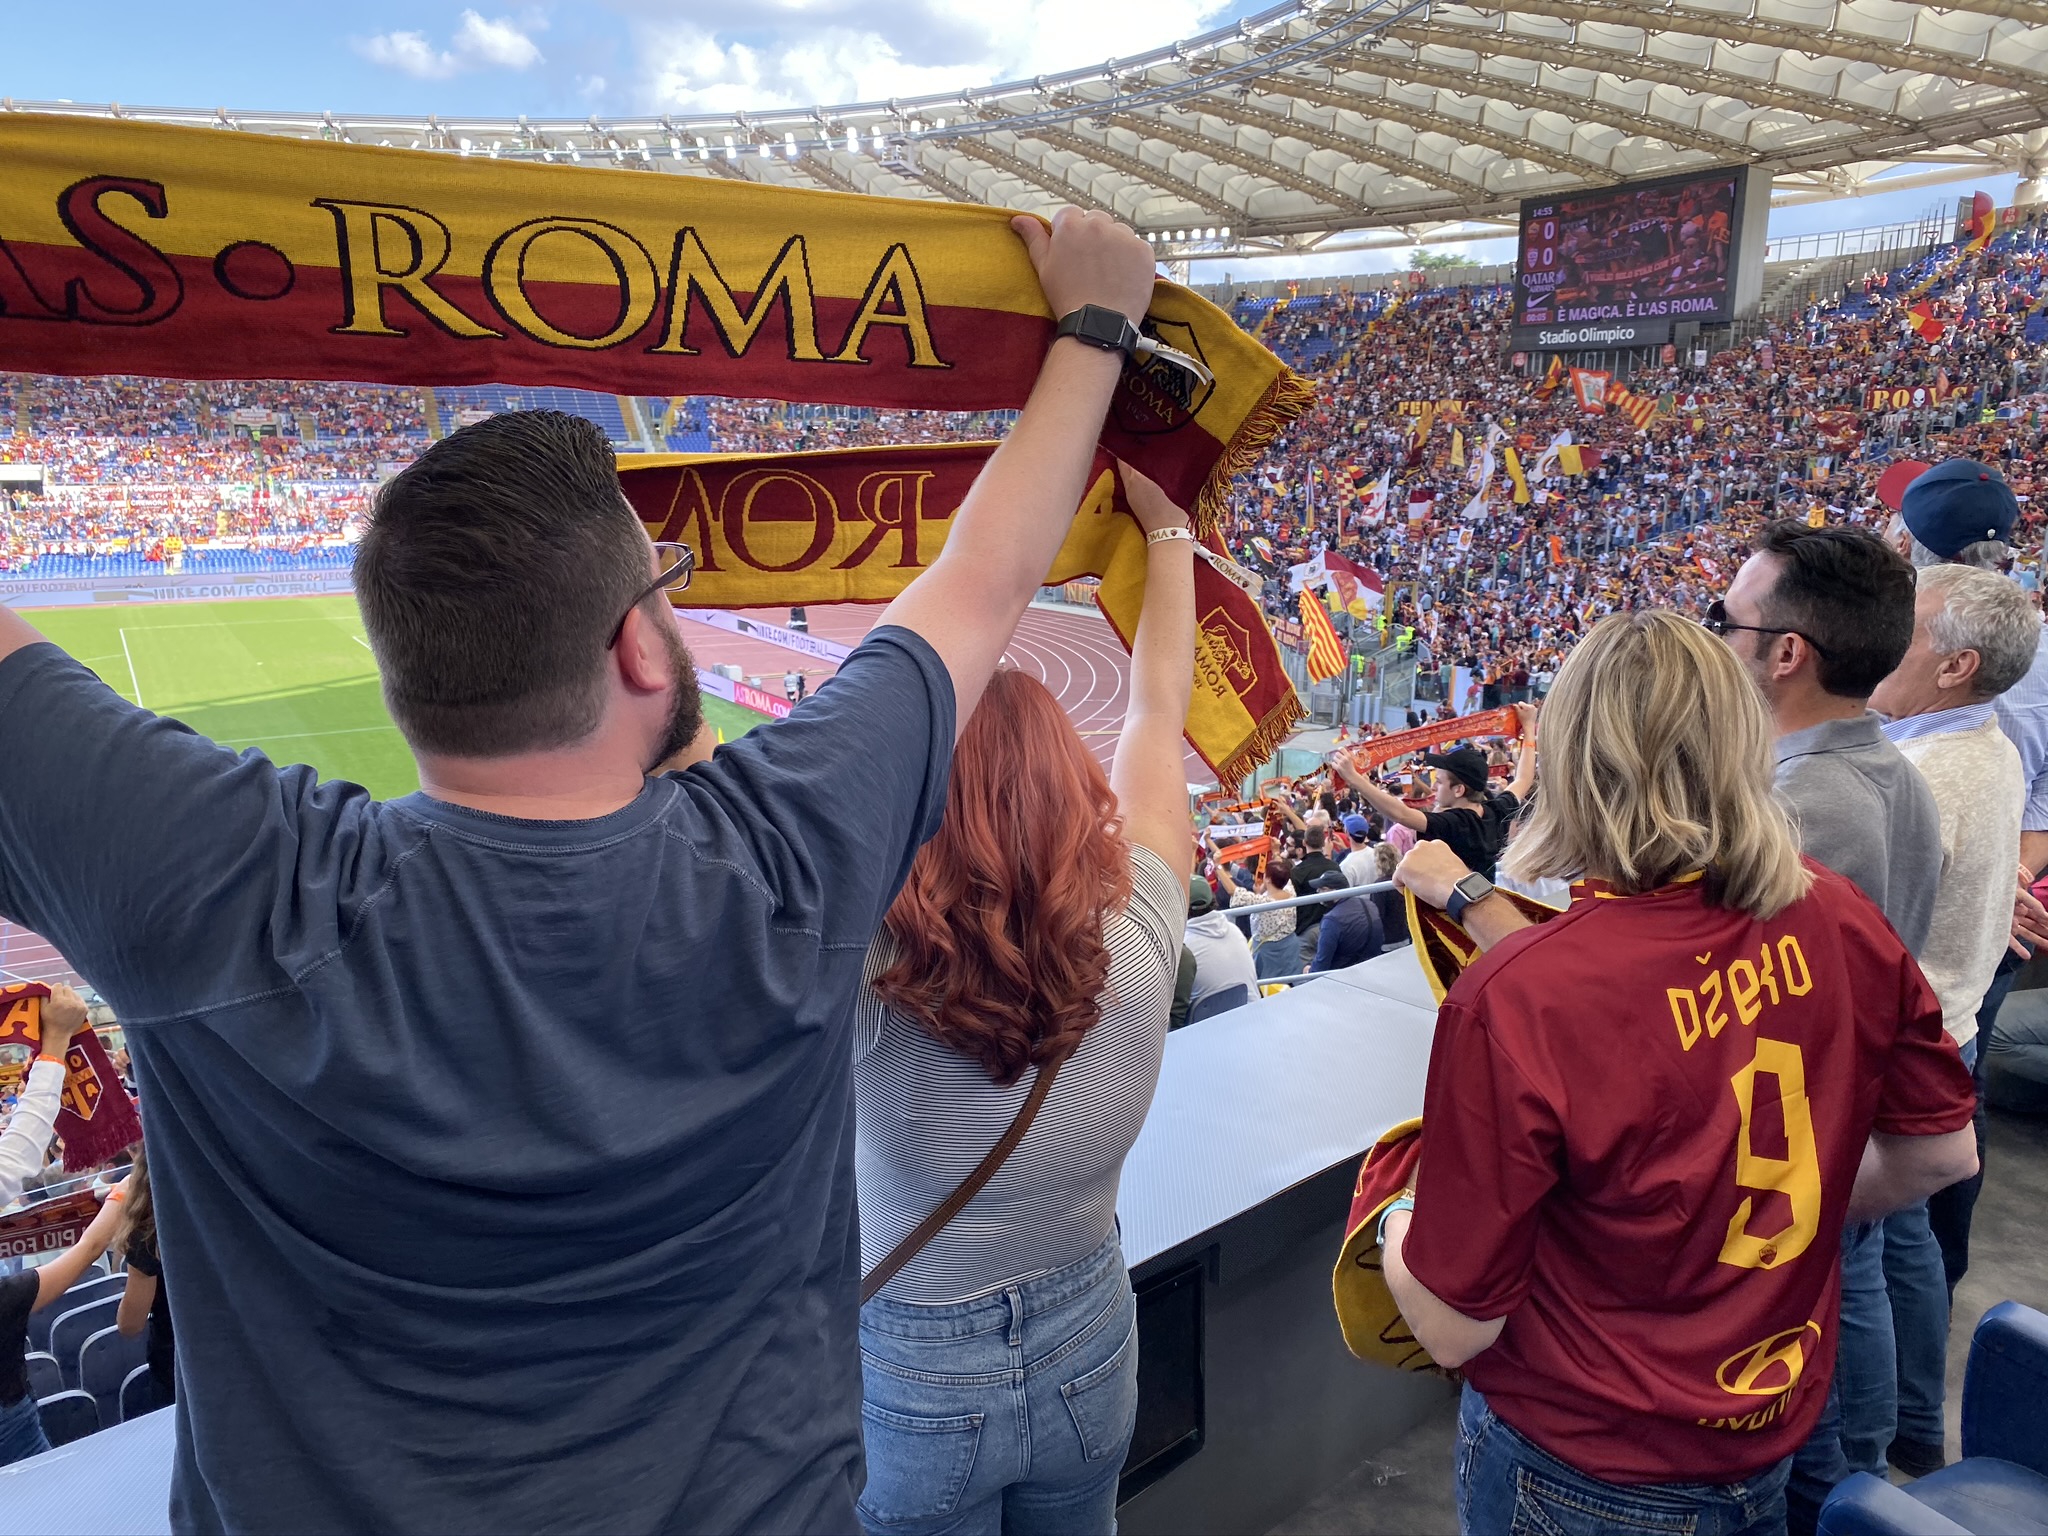 as roma tickets